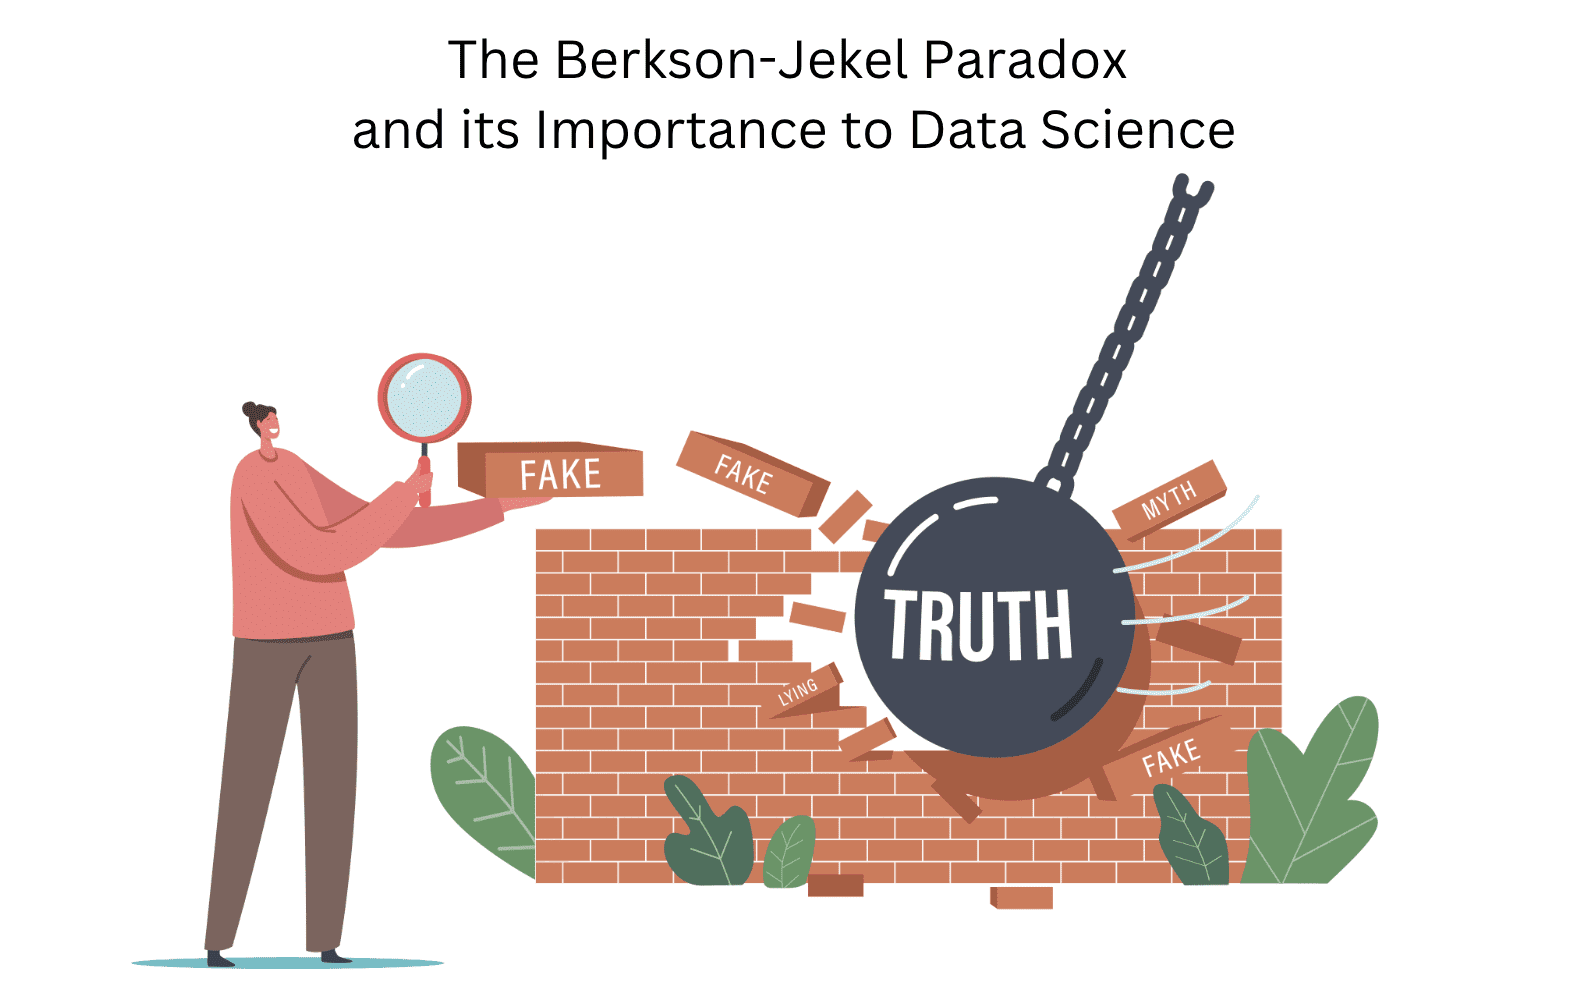 The Berkson-Jekel paradox and its importance for data science